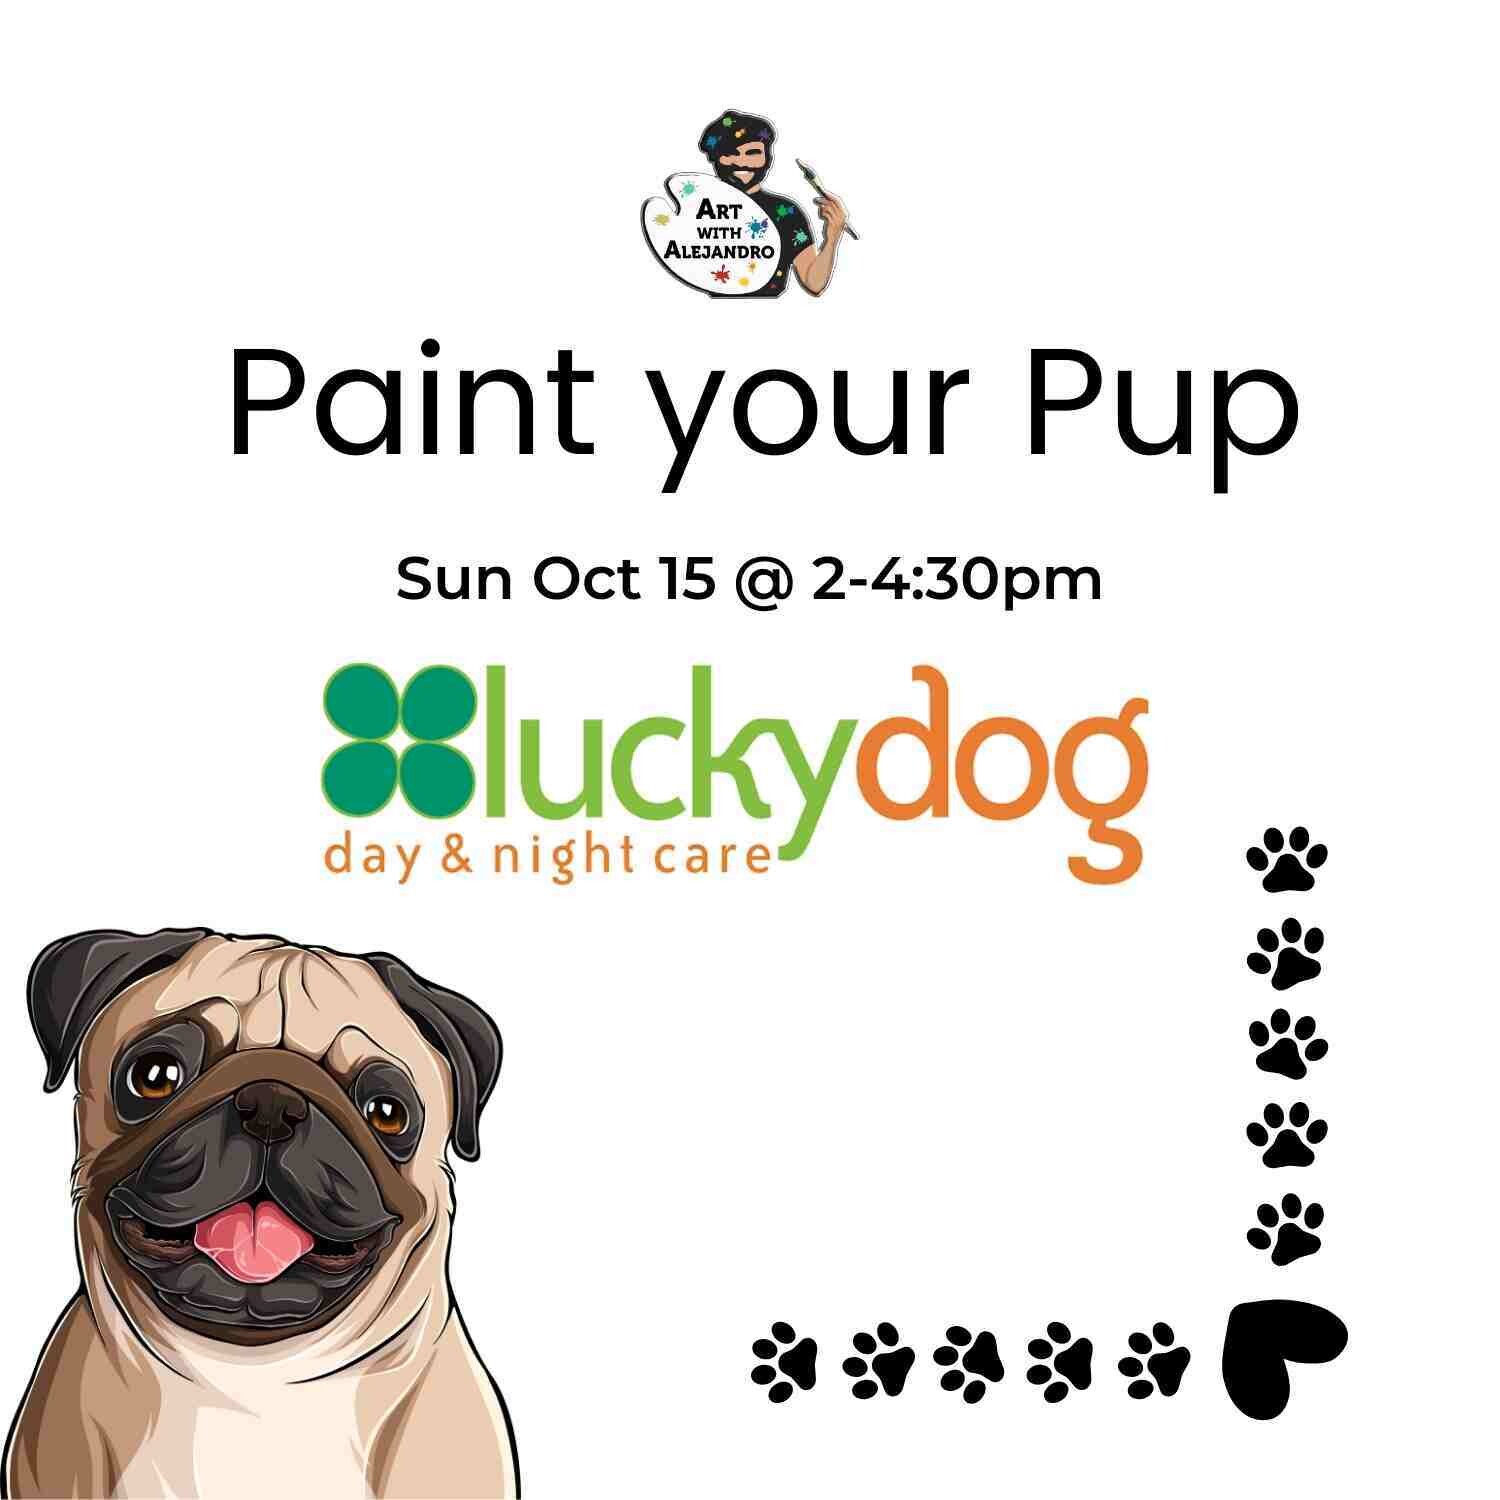 Paint your Pup with Luckydog Day &amp; Night Care